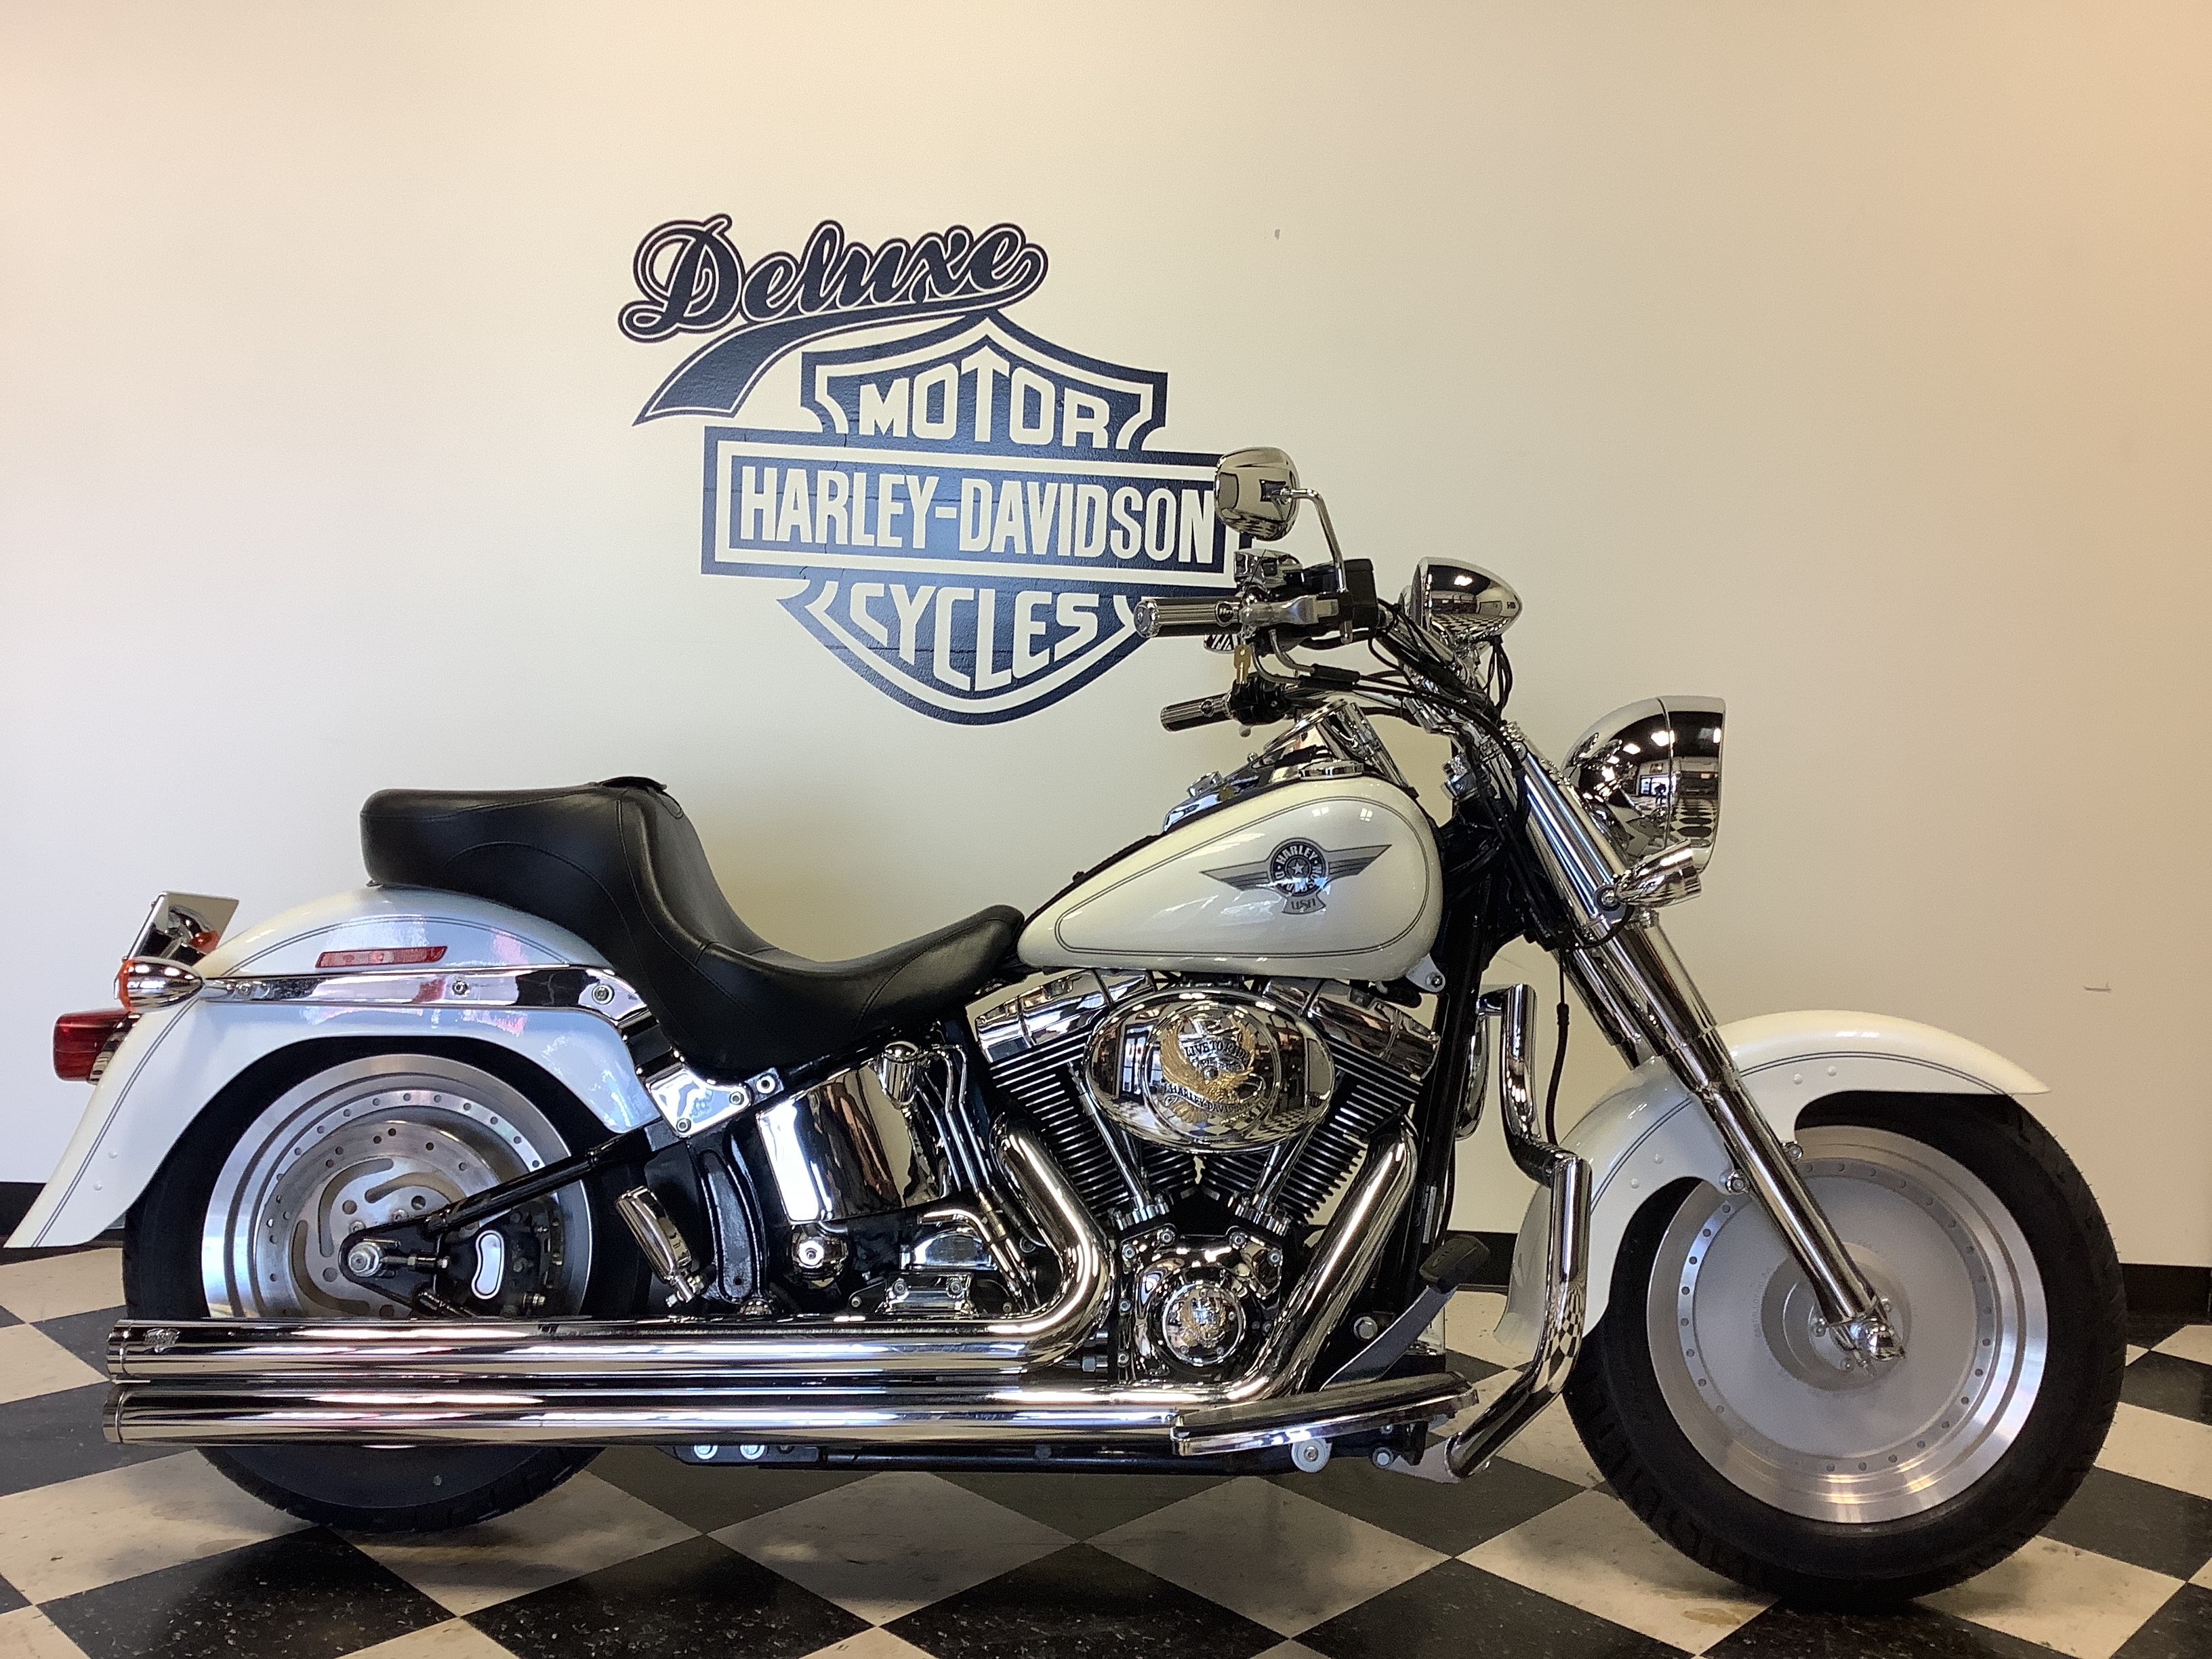 Our Harley-Davidson Softail Inventory